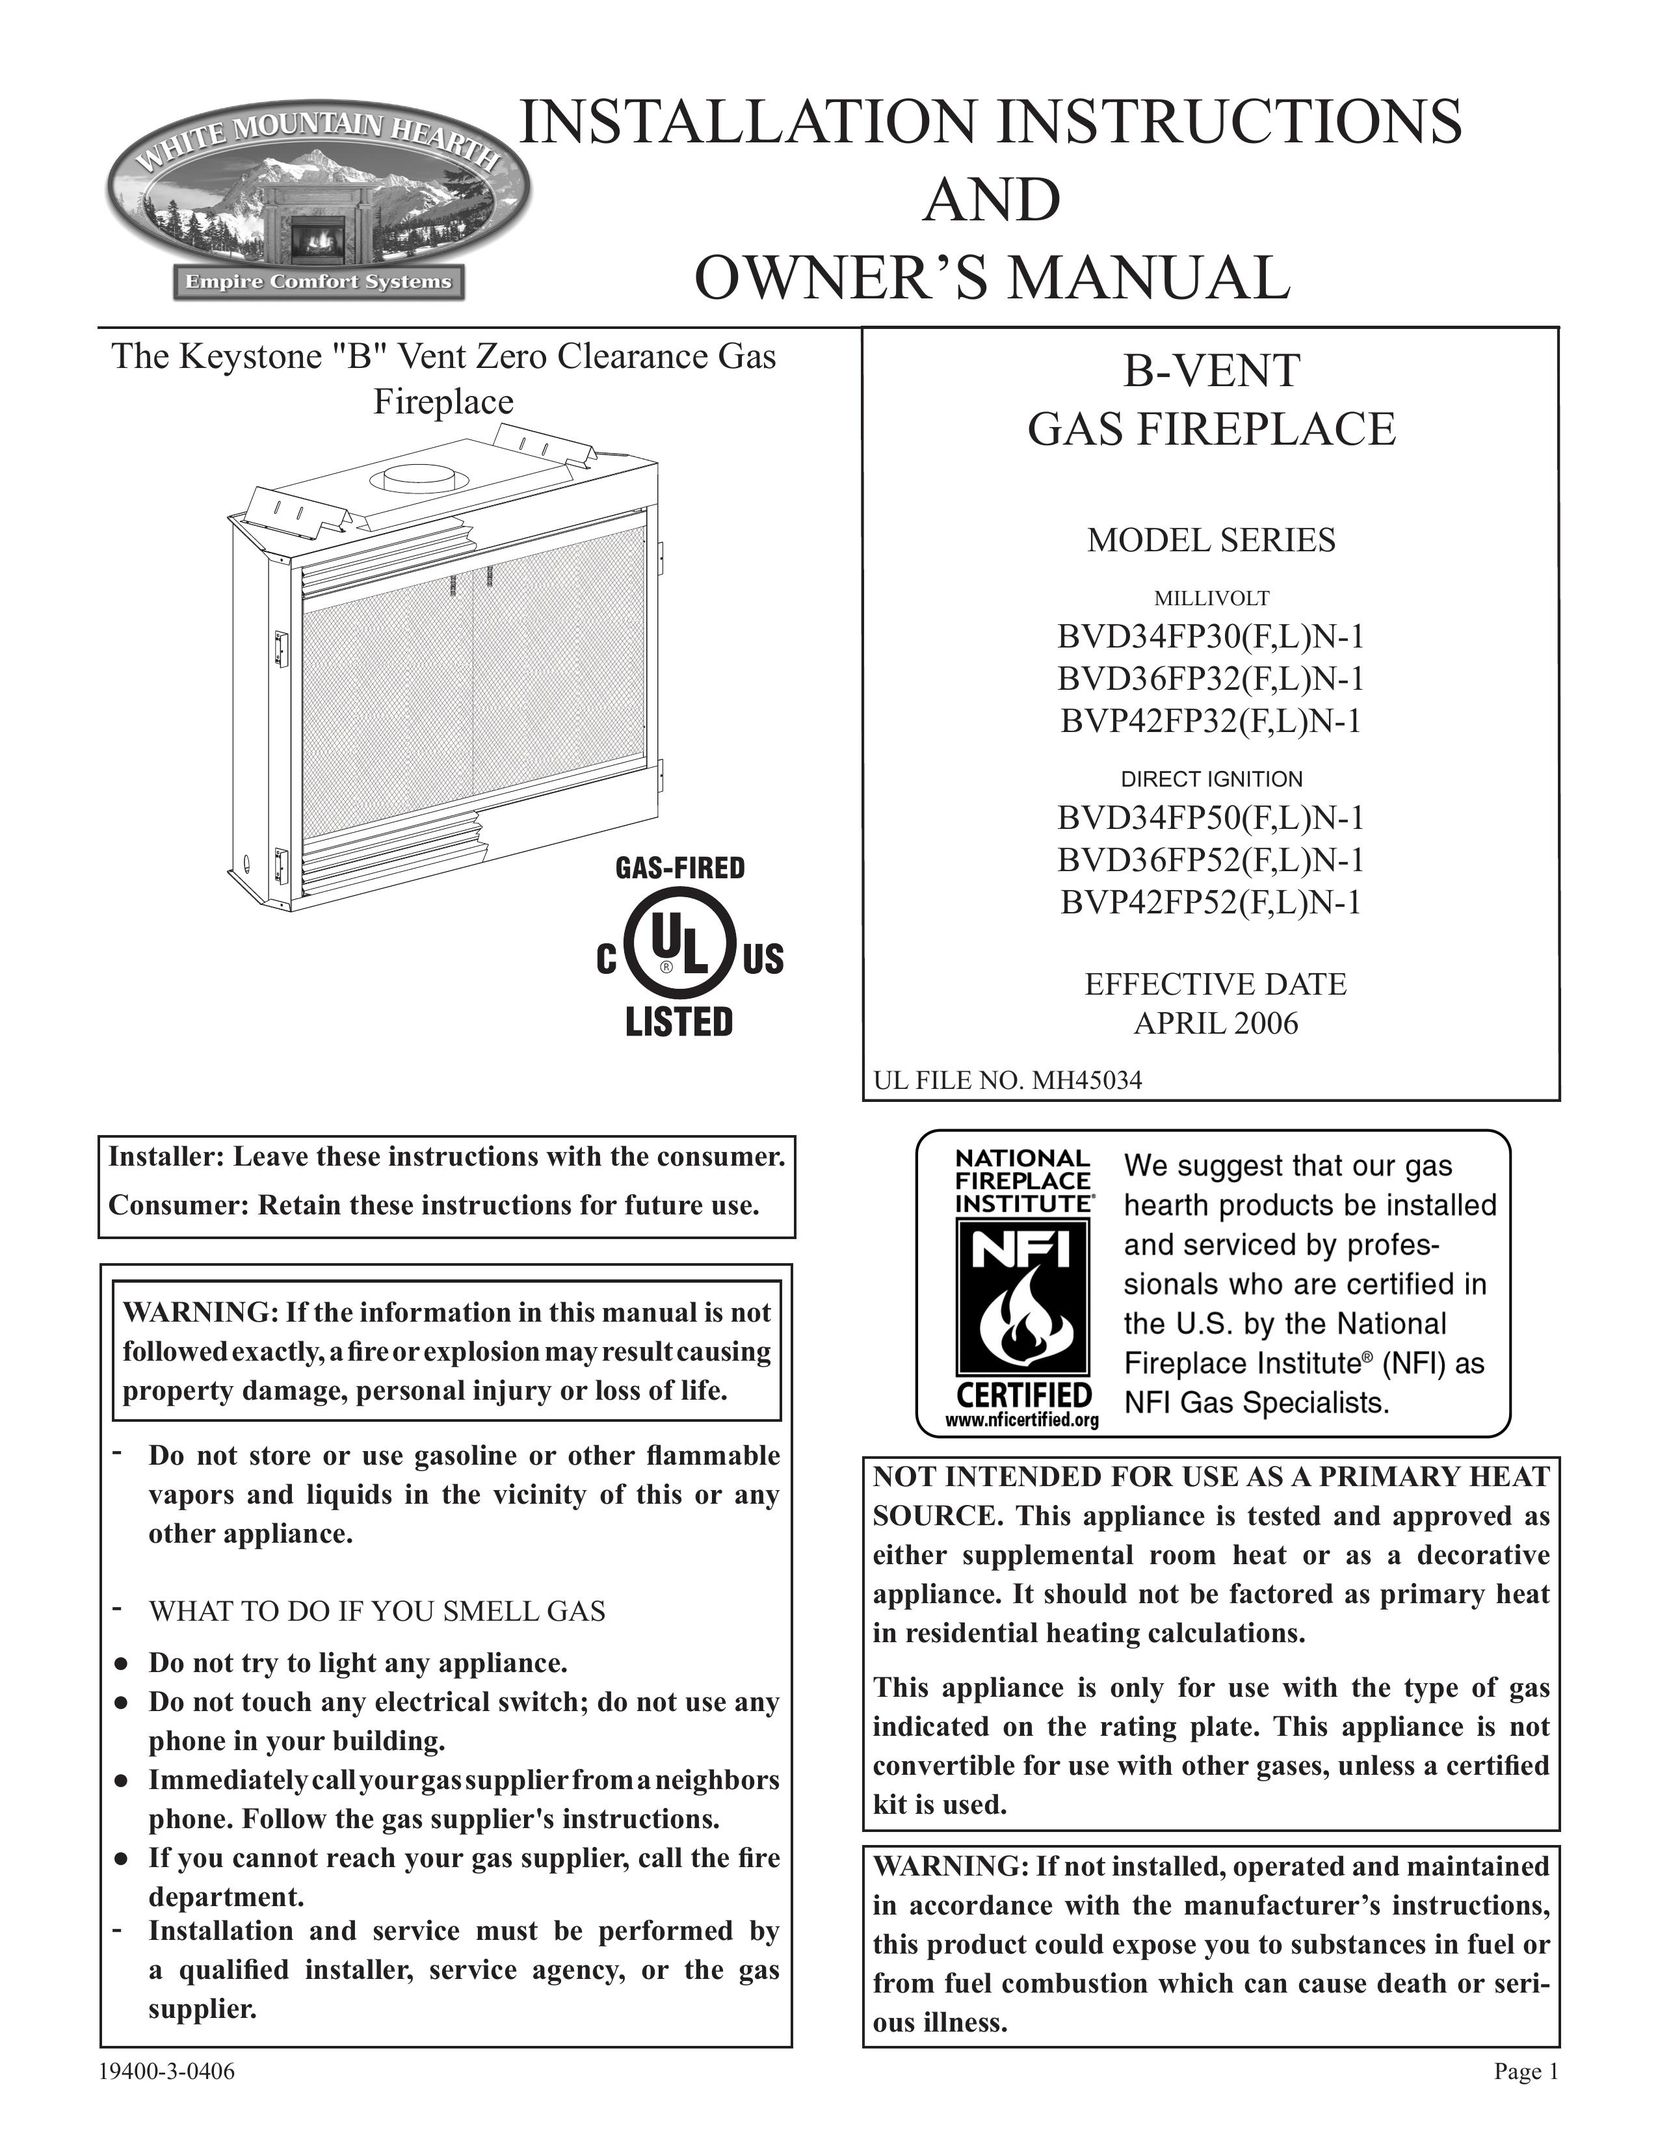 Empire Comfort Systems BVP42FP32 Indoor Fireplace User Manual